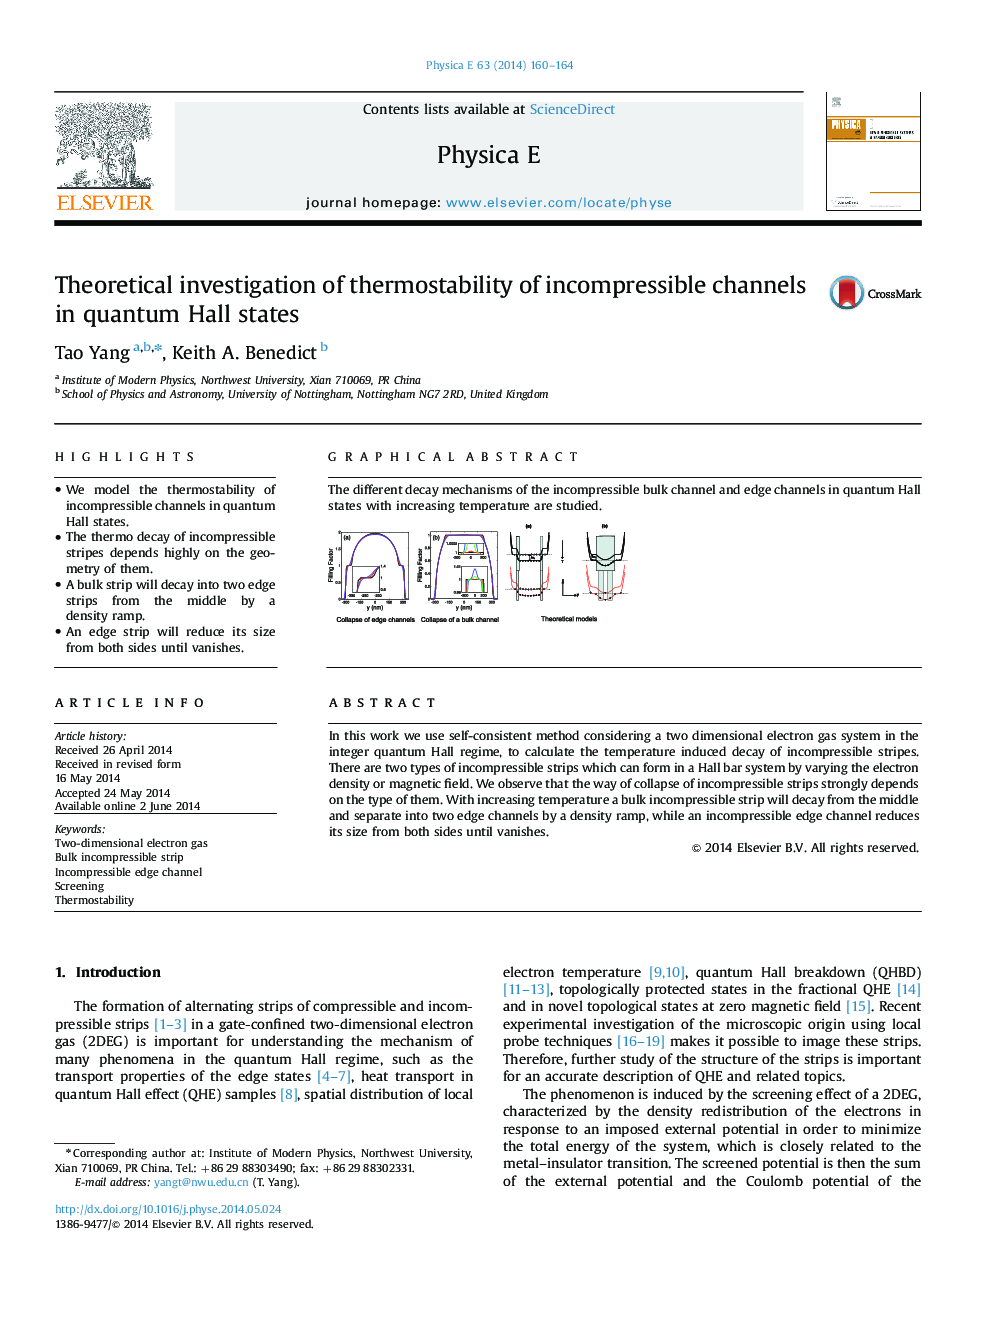 Theoretical investigation of thermostability of incompressible channels in quantum Hall states